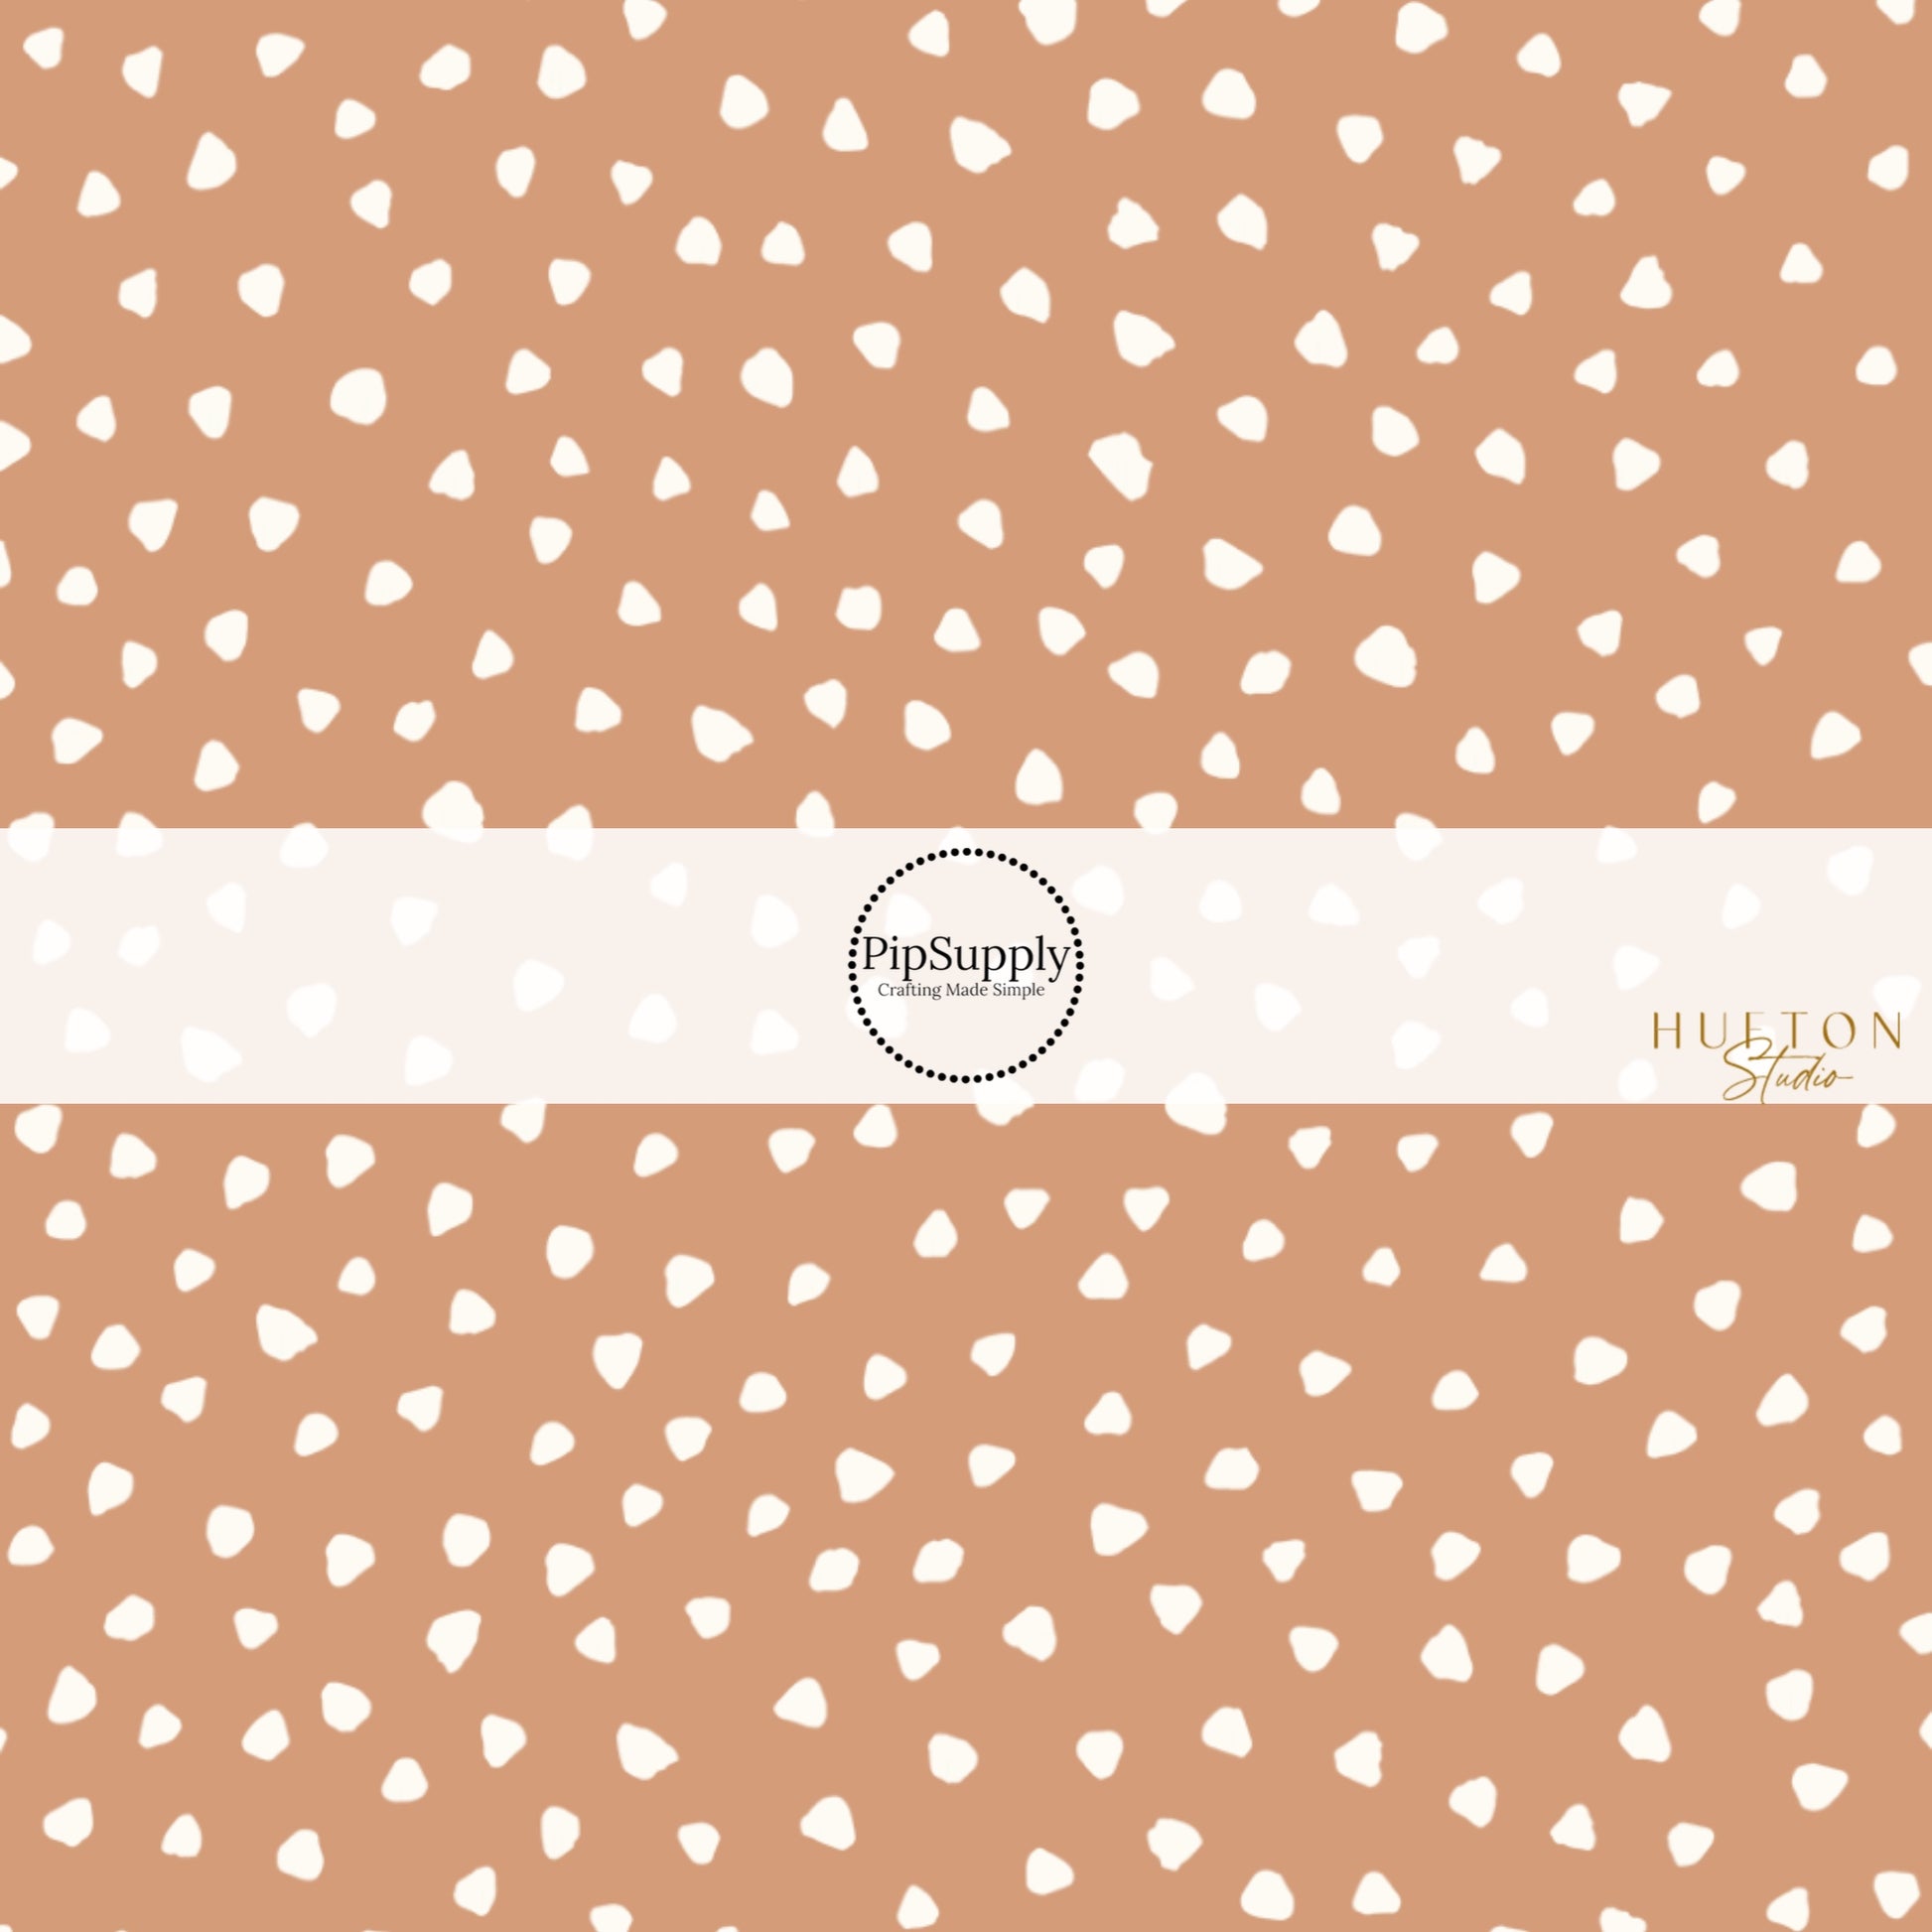 These speckled themed headband kits are easy to assemble and come with everything you need to make your own knotted headband. These kits include a custom printed and sewn fabric strip and a coordinating velvet or ribbed headband. The headband kits features small cream speckled dots on tan.